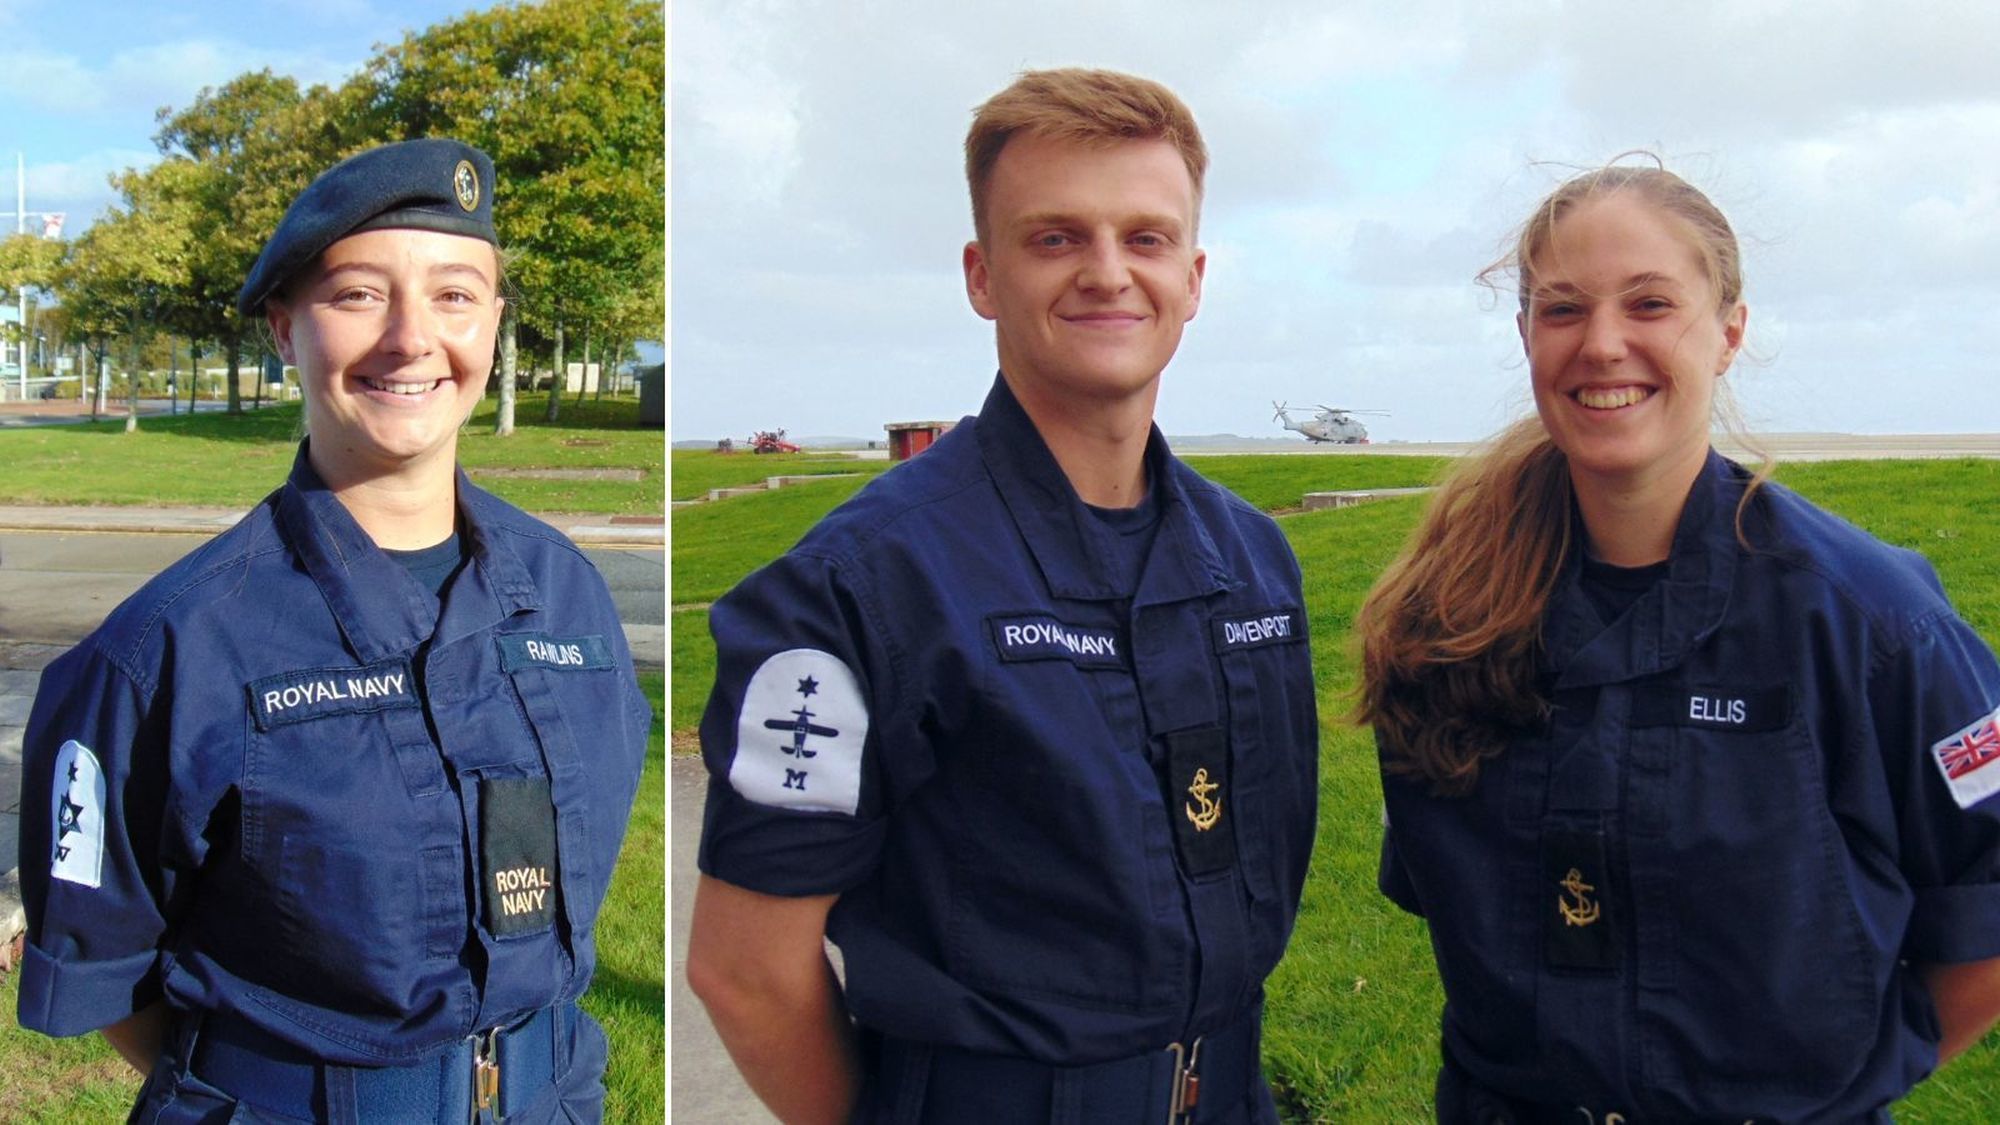 AB Writer Summer Rawlins and leading air engineering technicians Jake Davenport and Molly Ellis